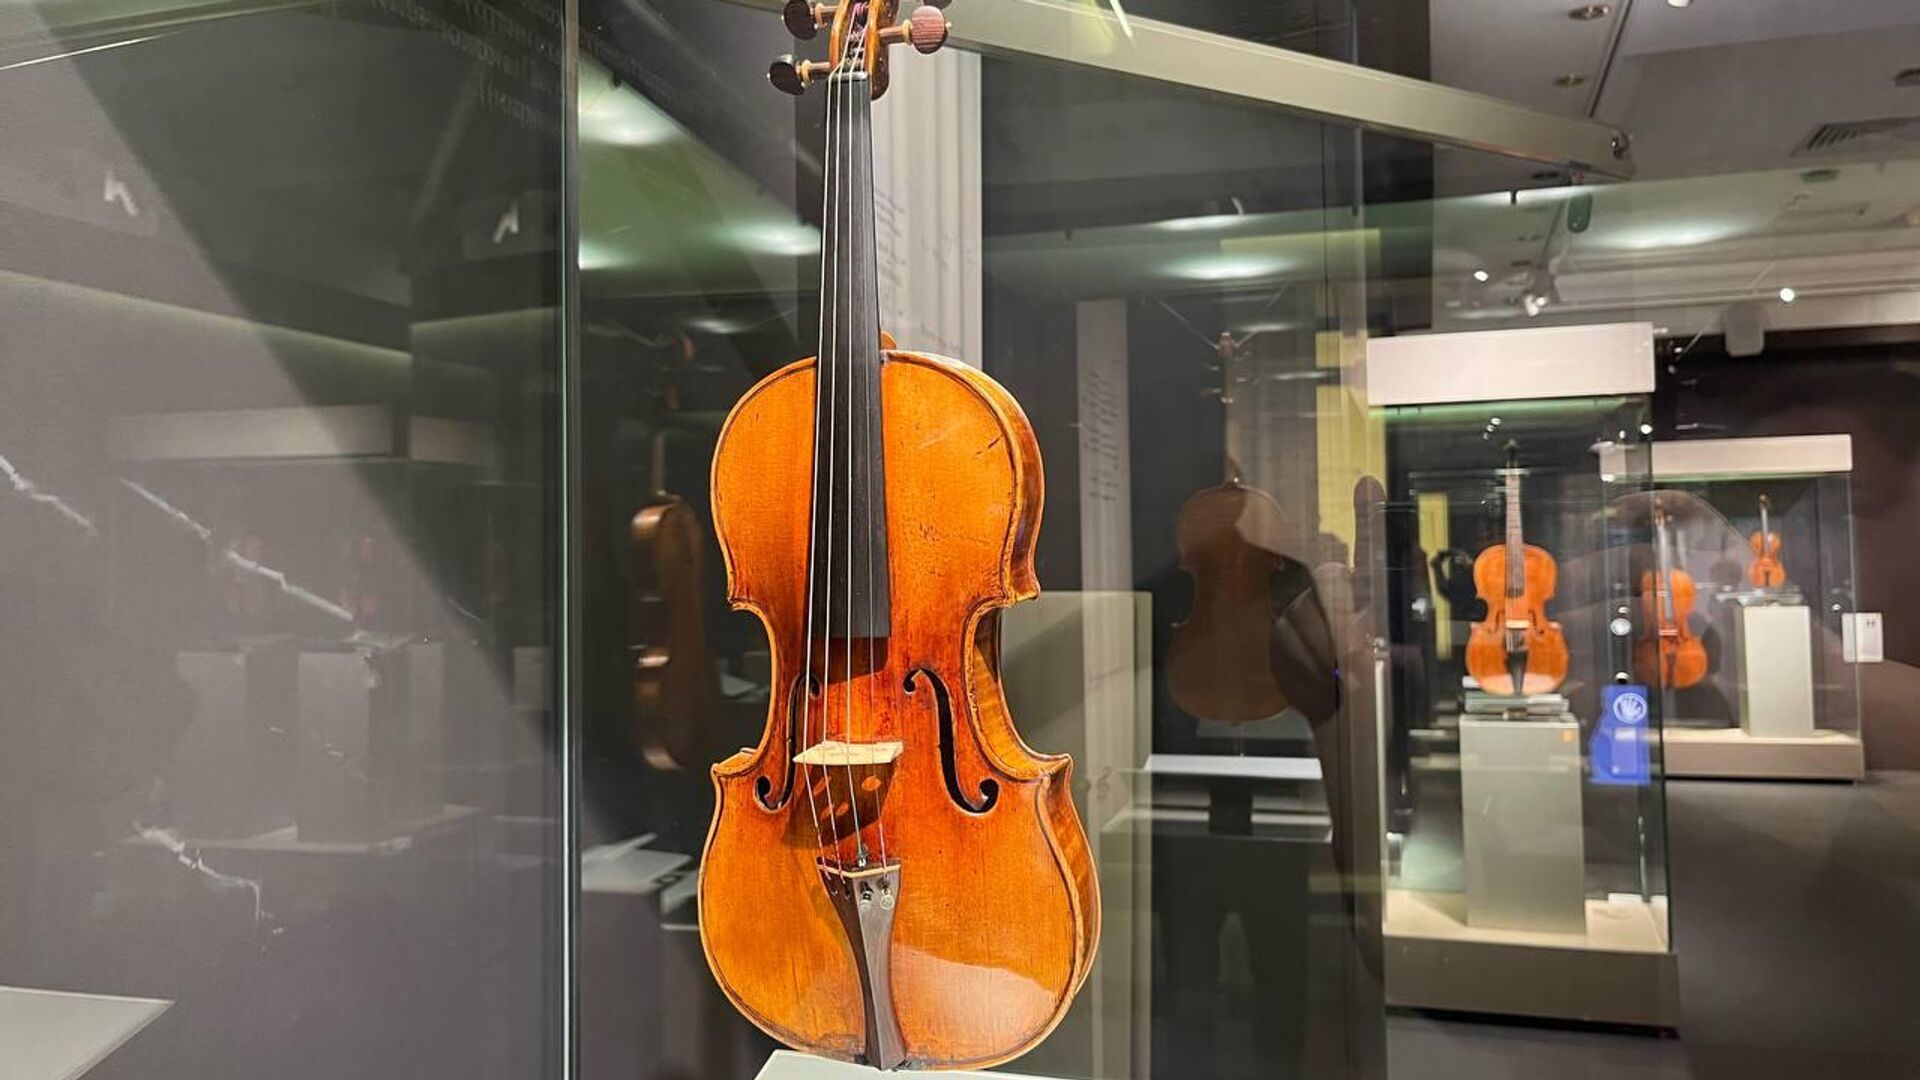 A restored Stradivarius violin will be exhibited at the Moscow Music Museum